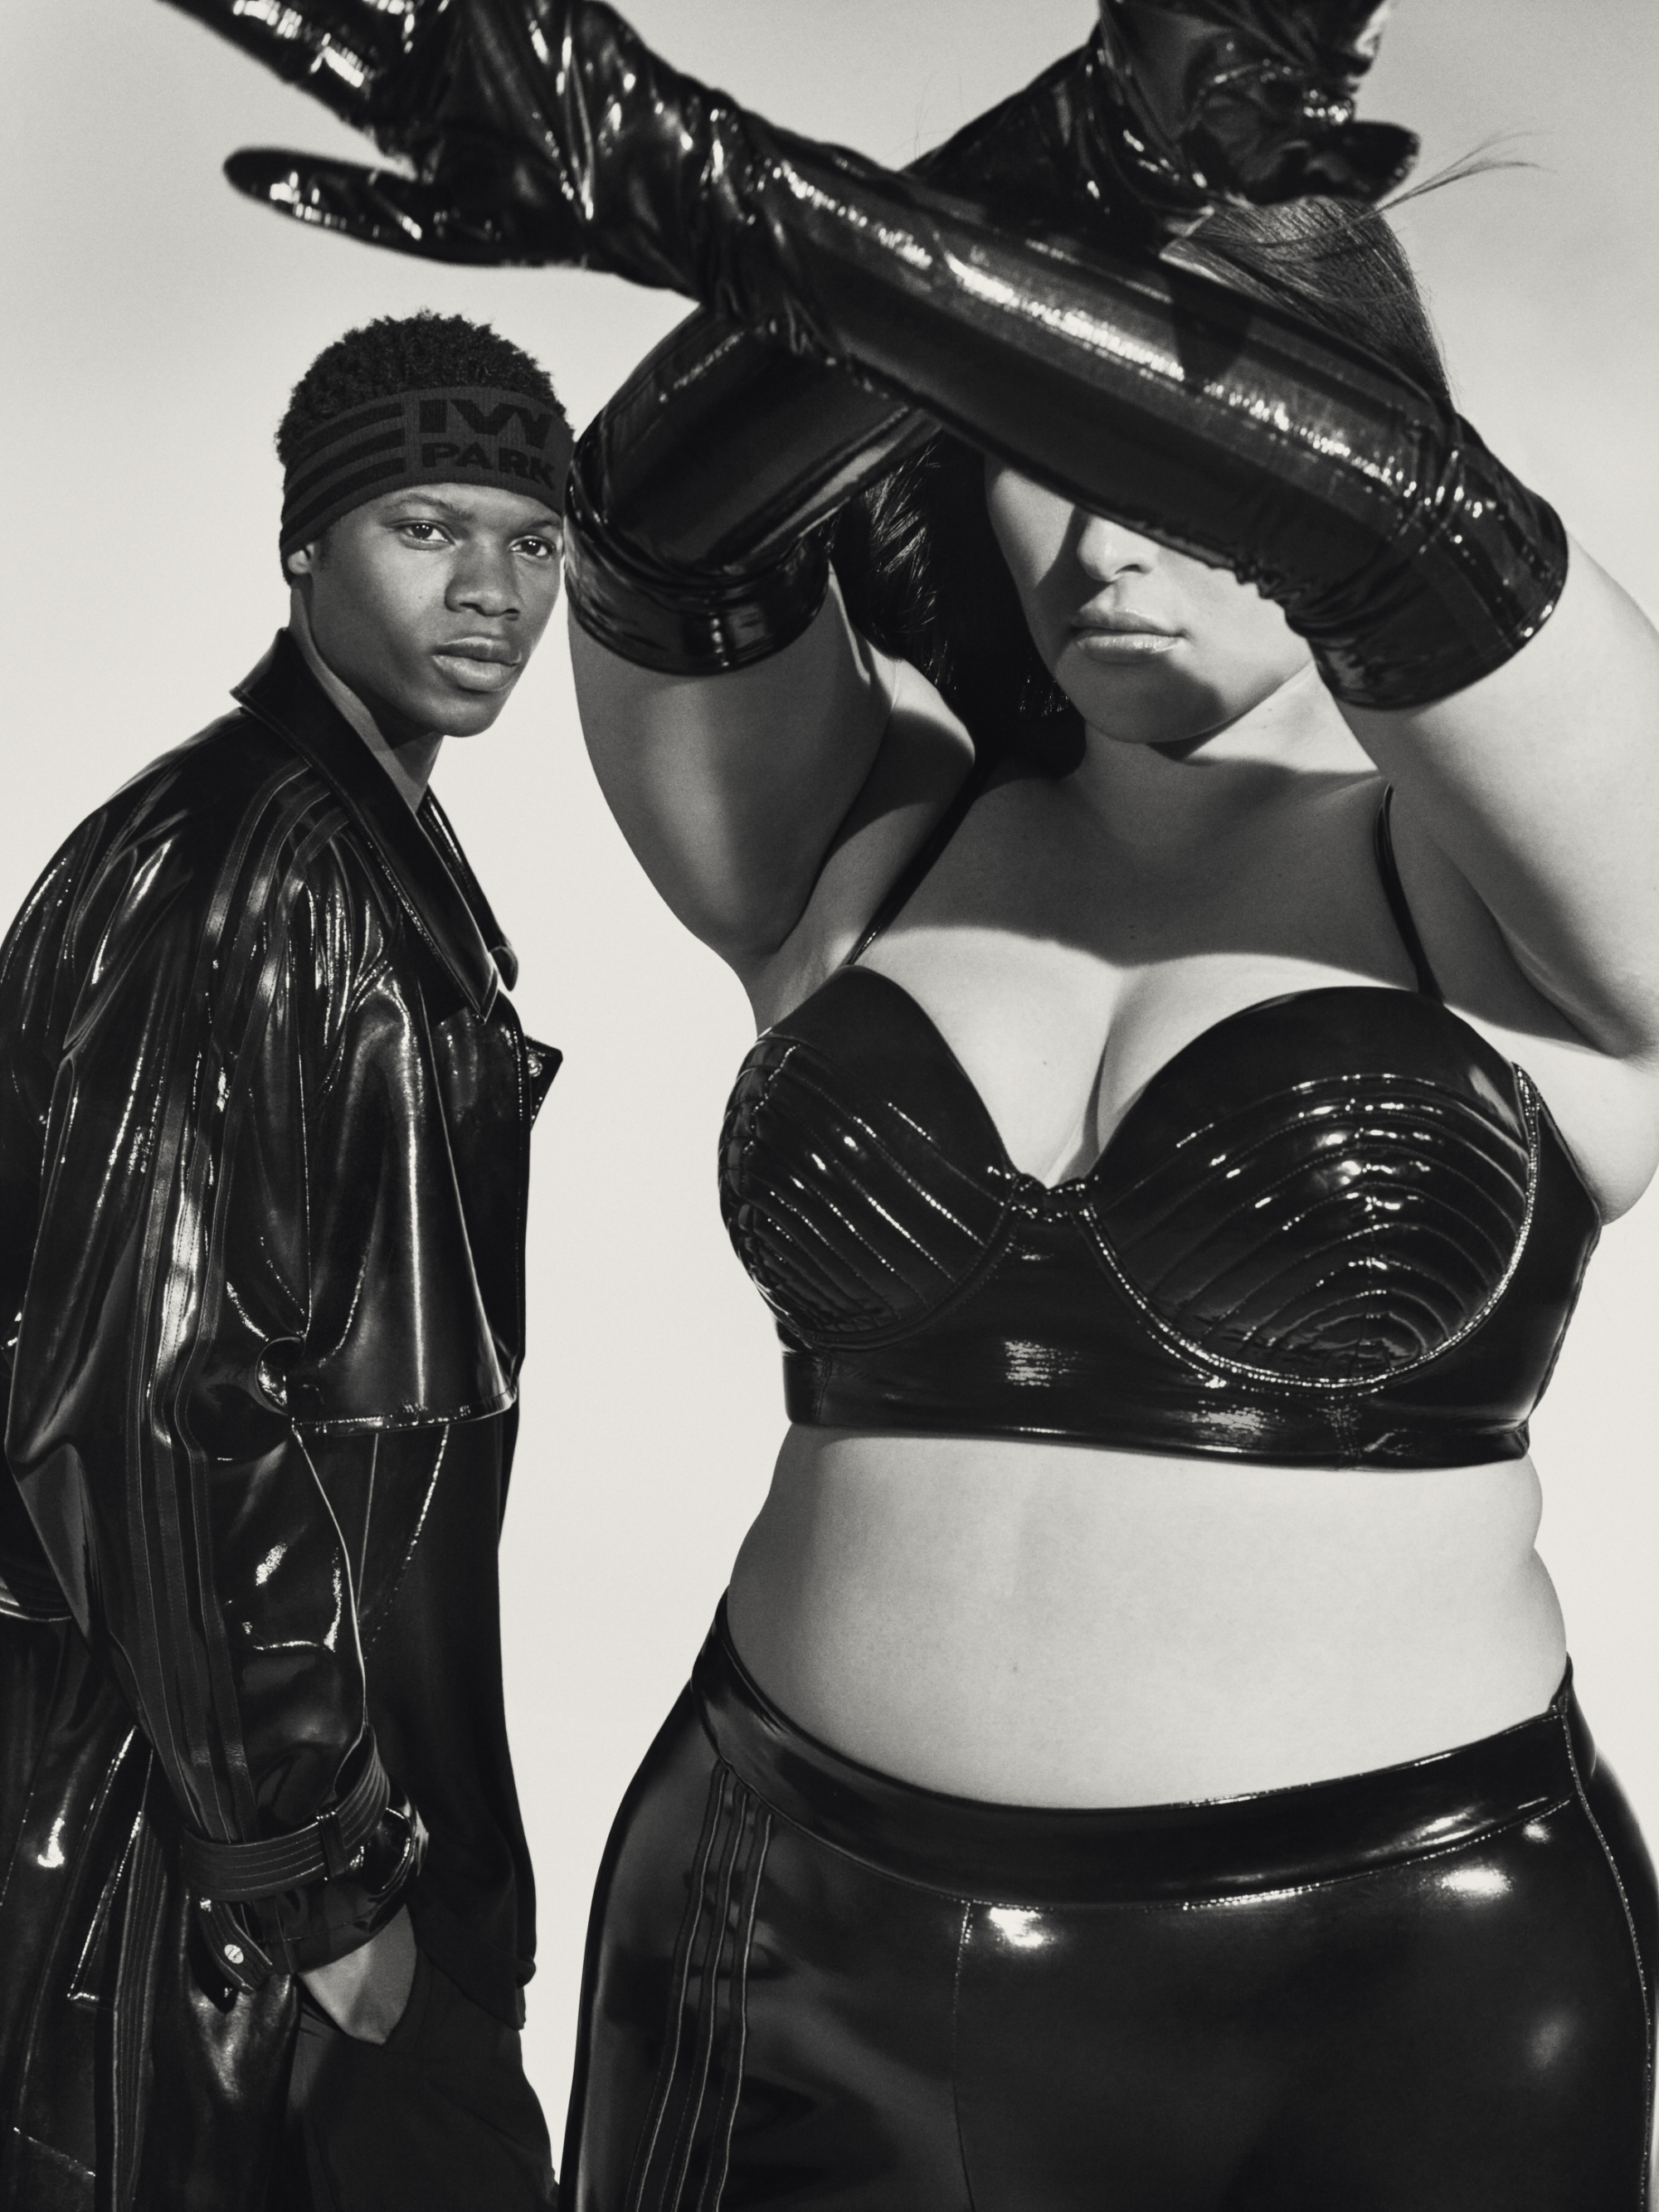 IVY PARK & adidas' Black NOIR Collection Saves the Best for Last